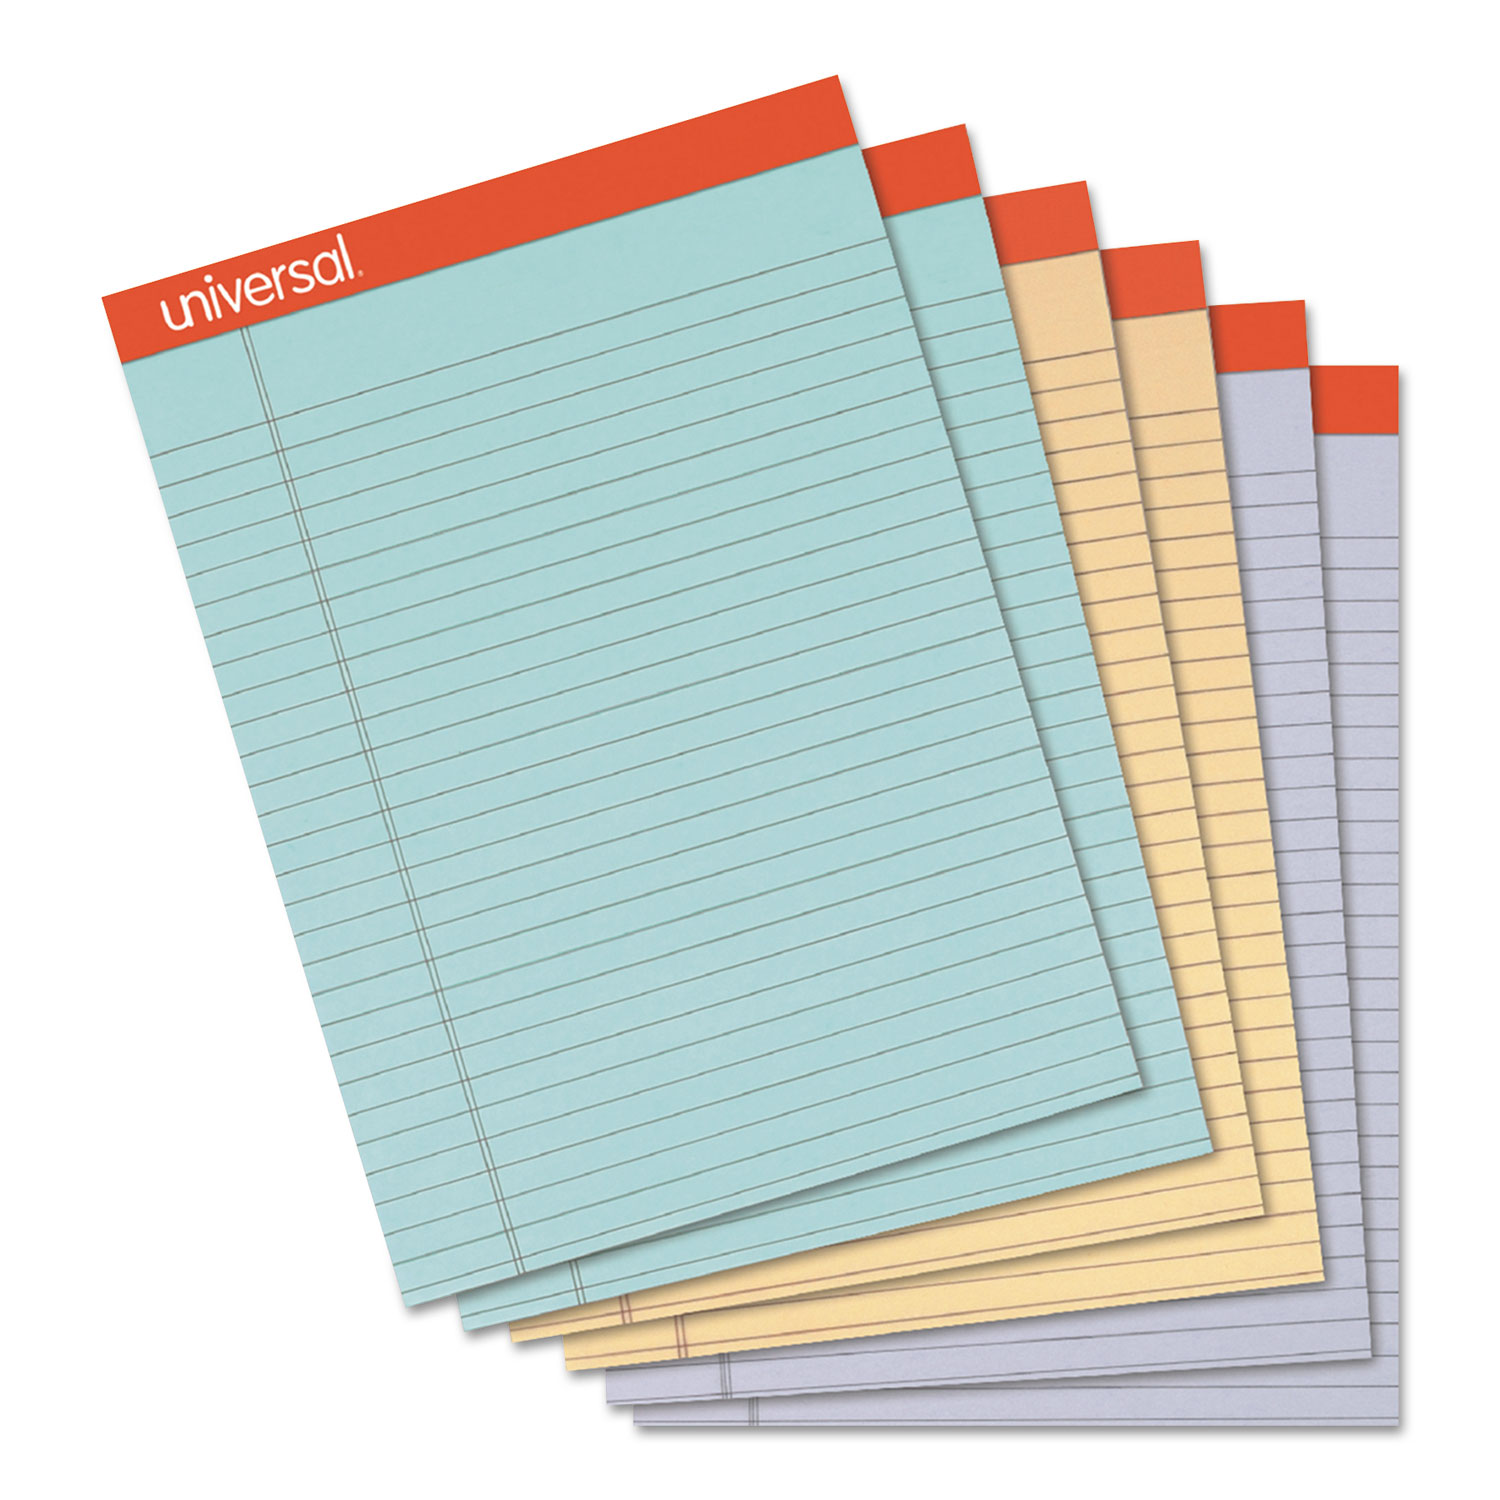  Universal UNV35878 Perforated Writing Pads, Wide/Legal Rule, 8.5 x 11.75, Assorted Sheet Colors, 50 Sheets, 6/Pack (UNV35878) 